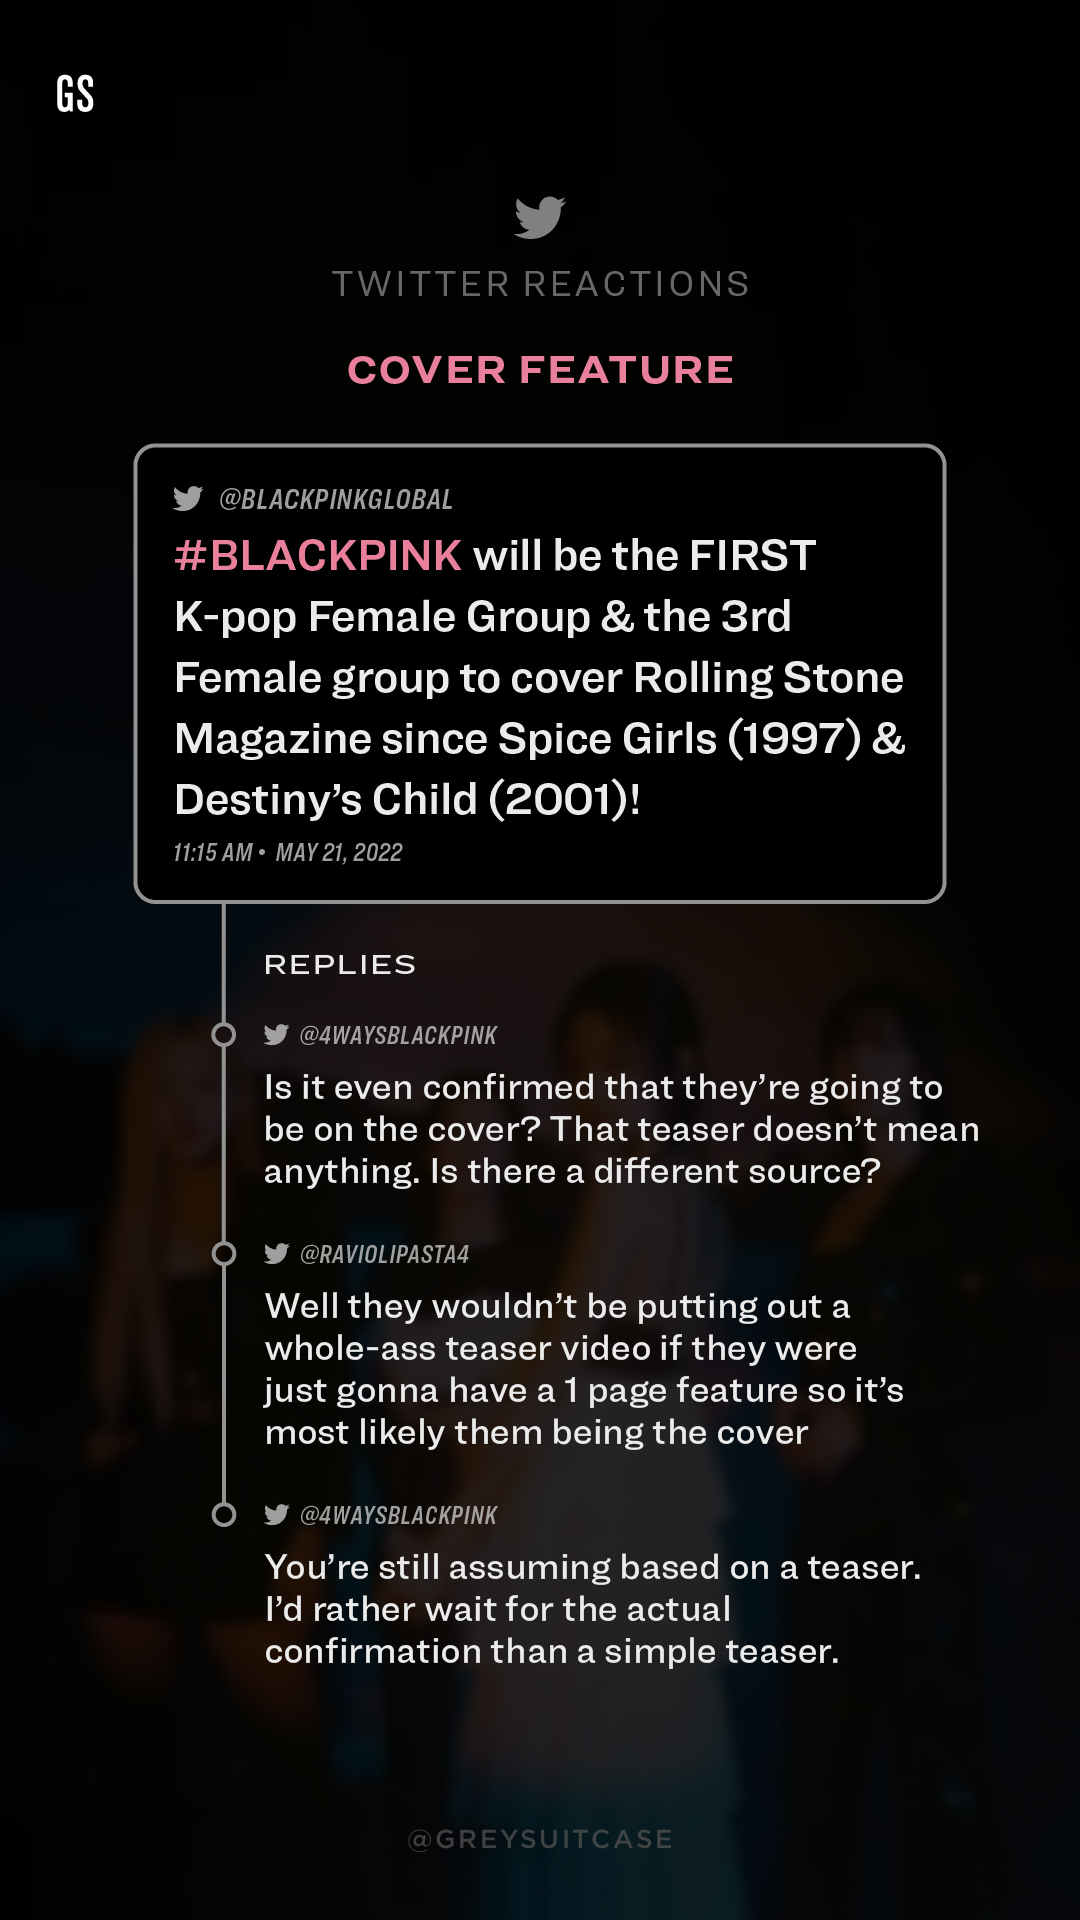  Blackpink x Rolling Stone Announcement Twitter Reactions 